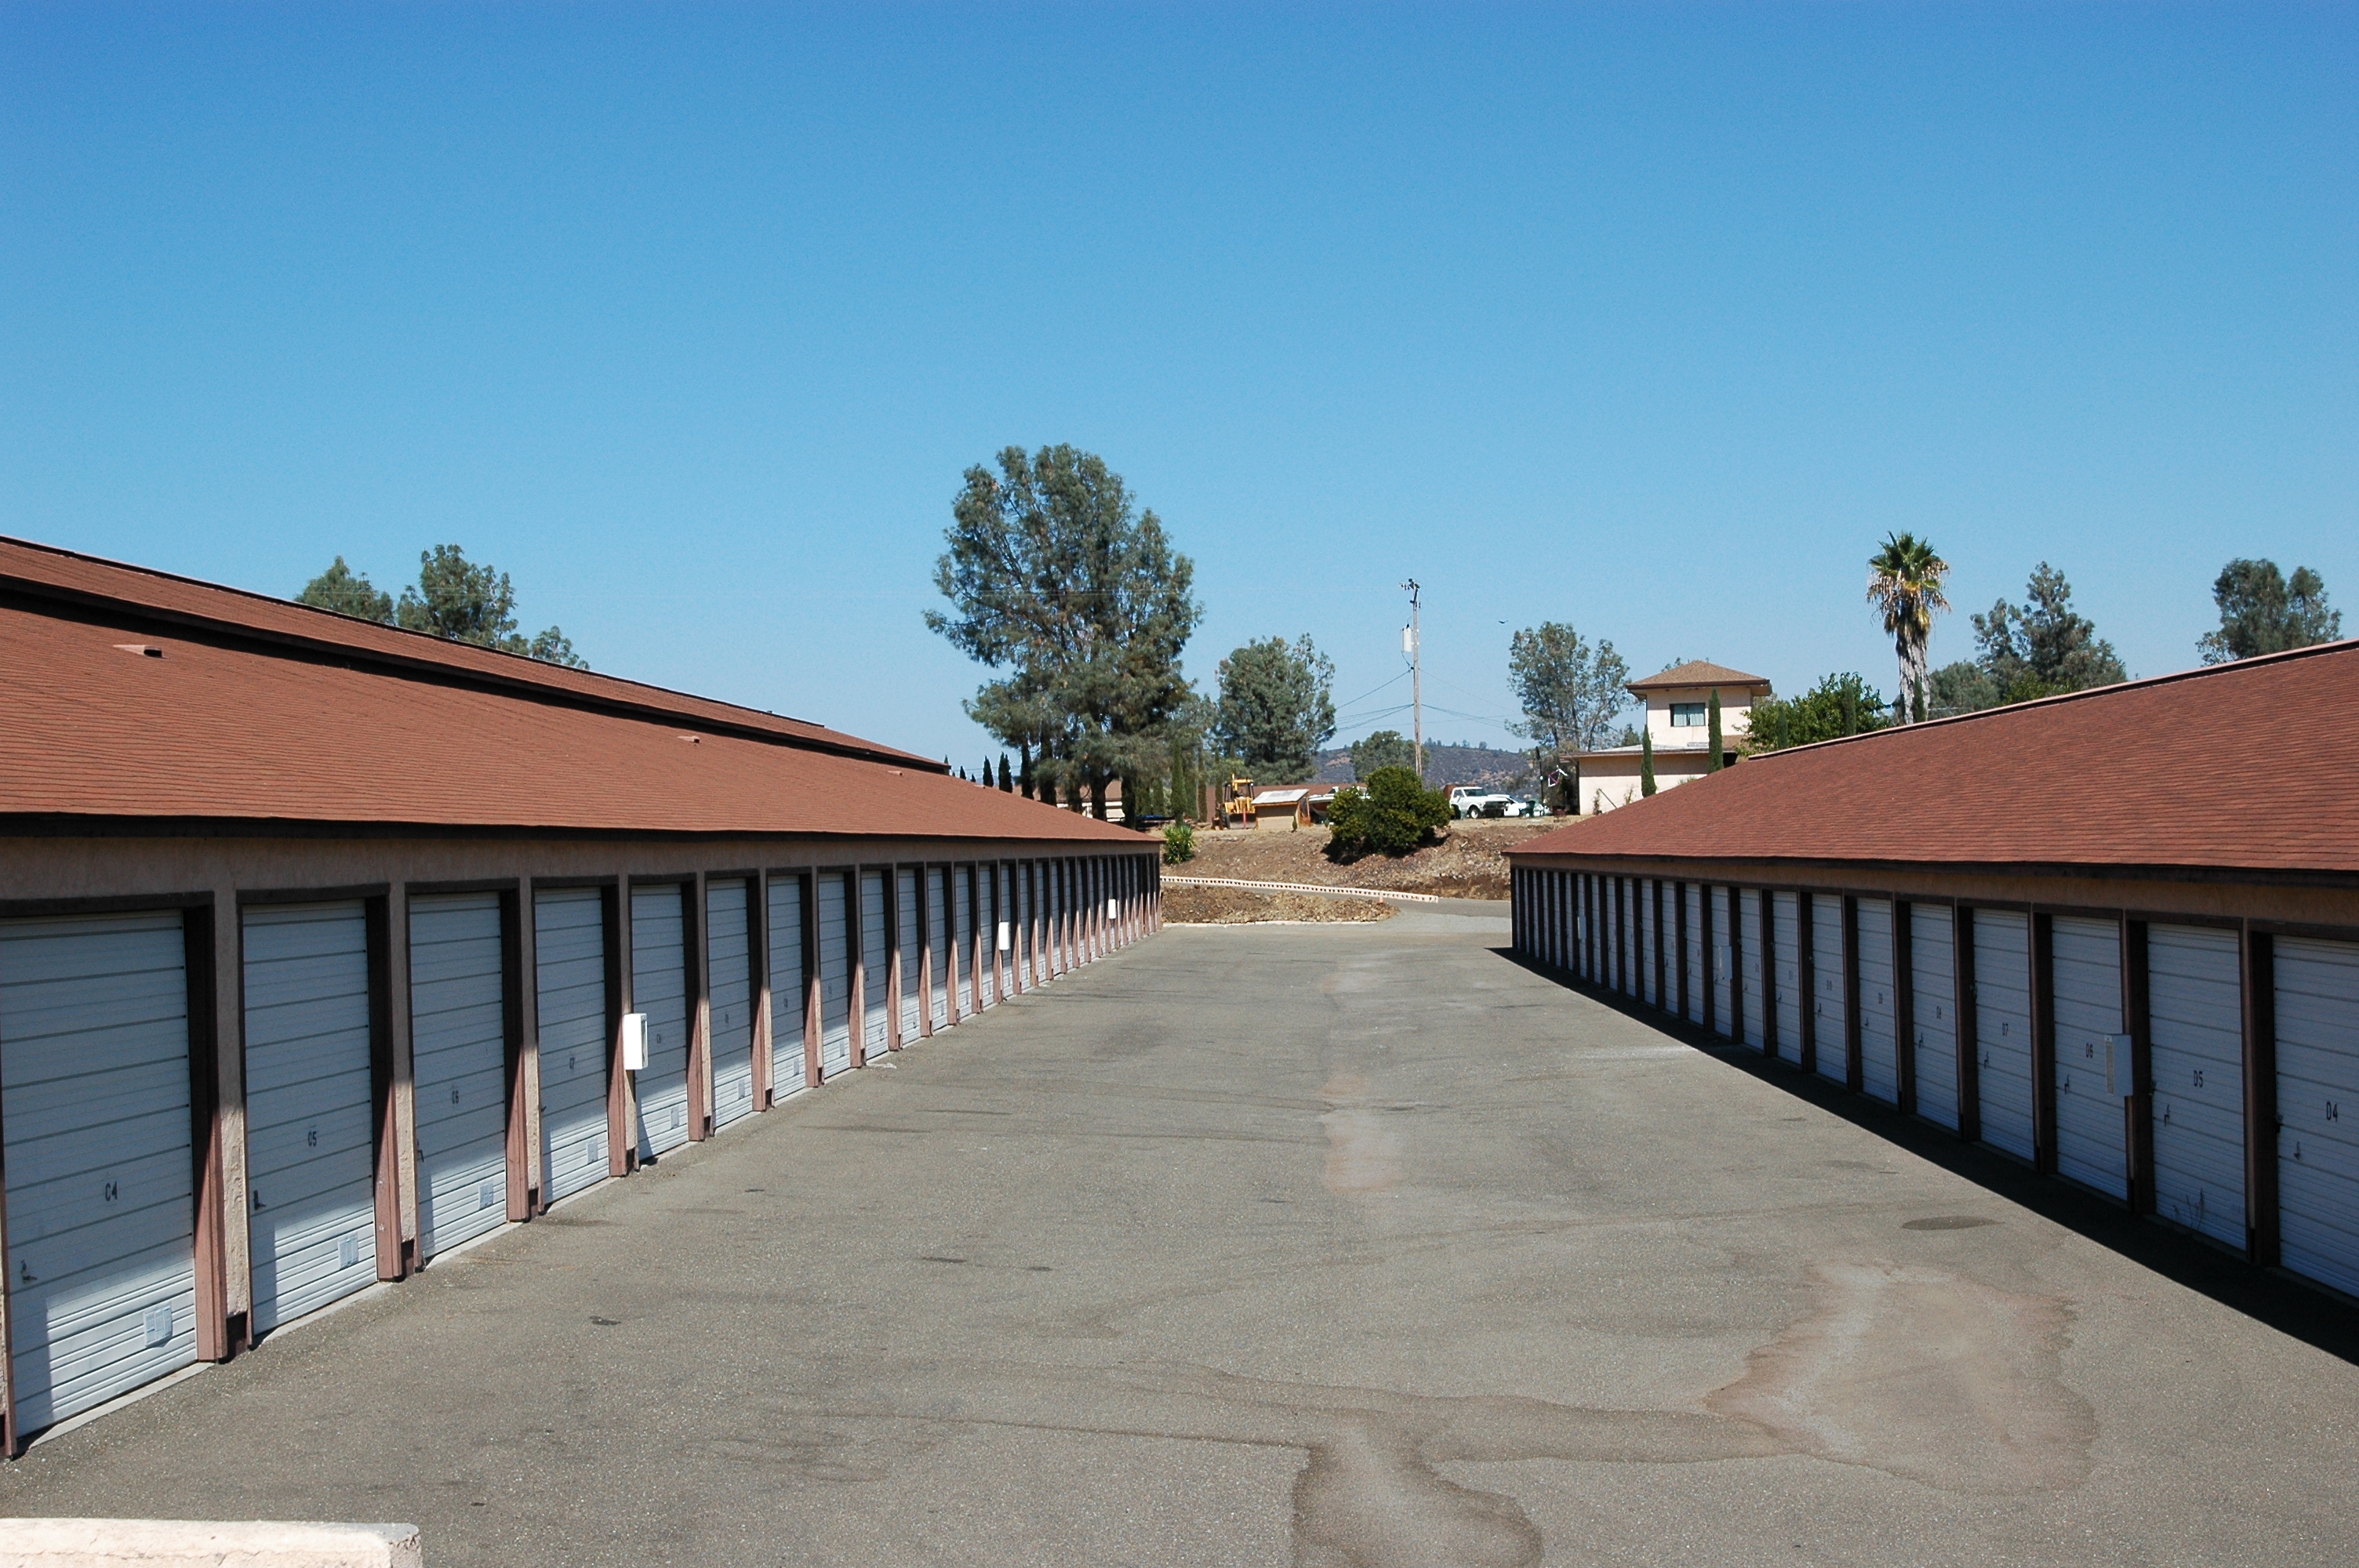 Lakeview Boat & RV Storage is located at 7150 Knoxville Road in Napa, CA. We offer outdoor boat and RV parking, coded gate entry, and more. Rent your unit online or give us a call at (707) 966-2628.